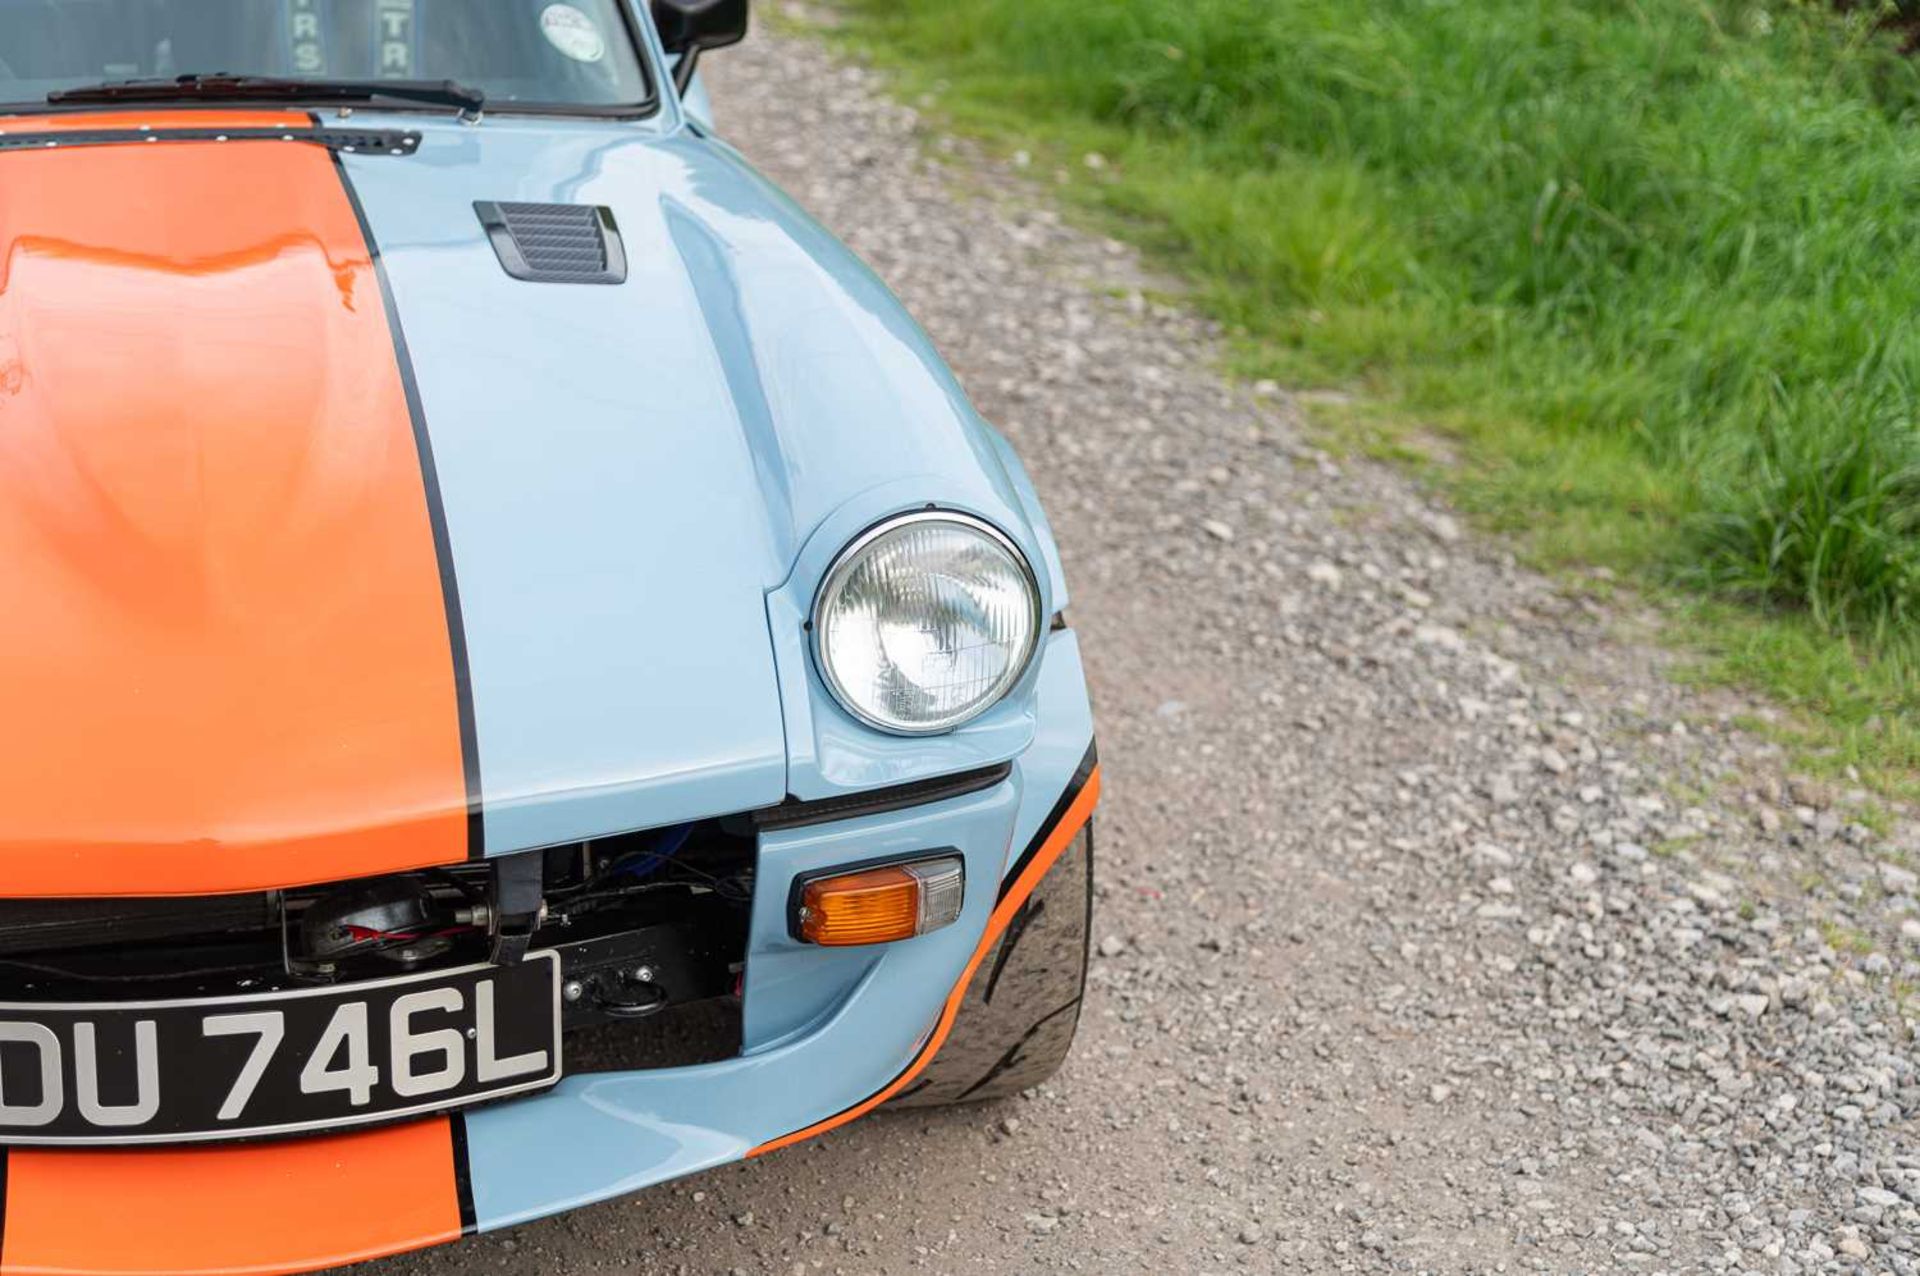 1973 Triumph GT6  ***NO RESERVE*** Presented in Gulf Racing-inspired paintwork, road-going track wea - Image 31 of 65